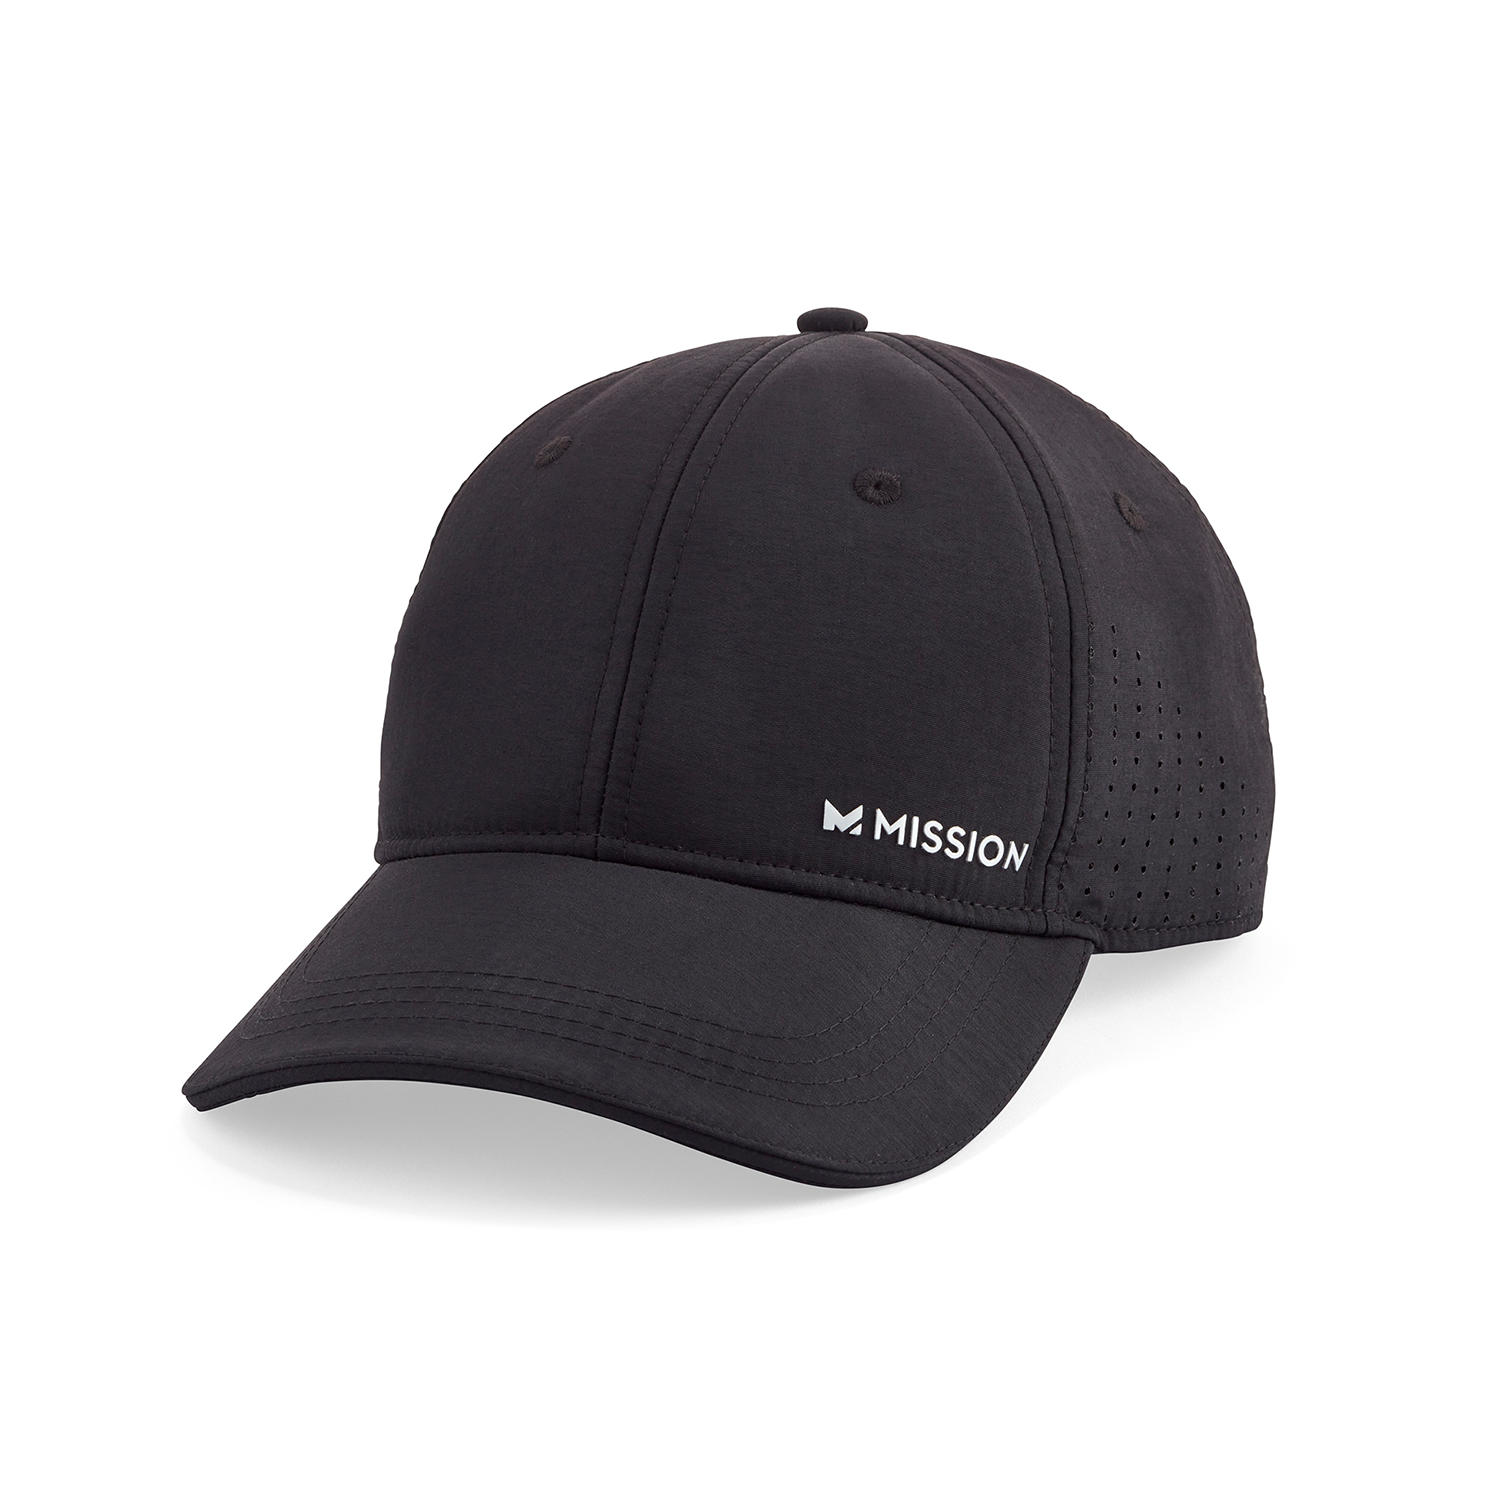 Cooling Vented Performance Hat Caps MISSION One Size Black 